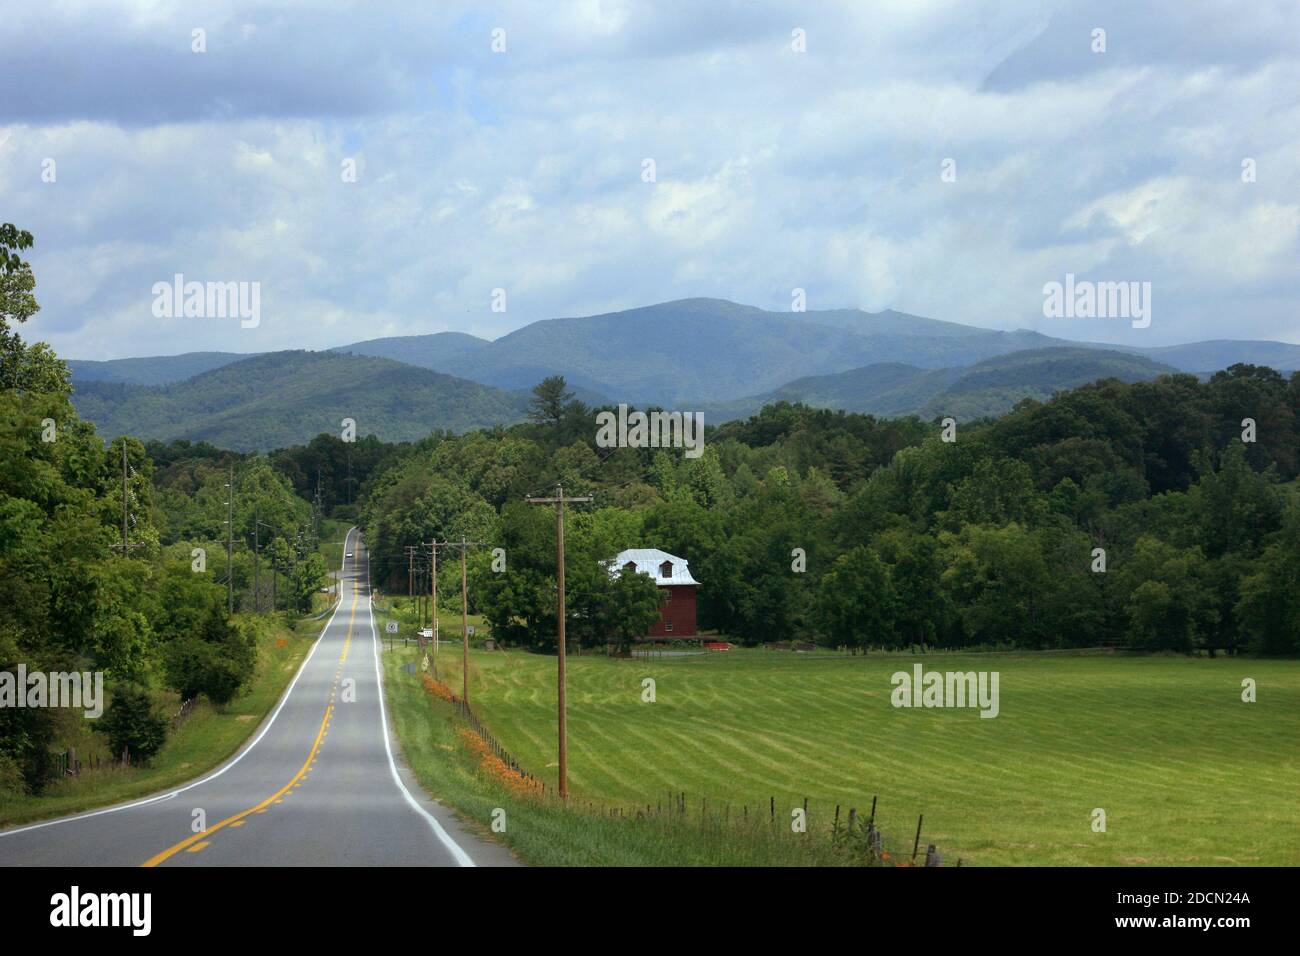 Virginia, USA. Driving through the countryside in the summertime, with view of the Blue Ridge Mountains ahead. Stock Photo